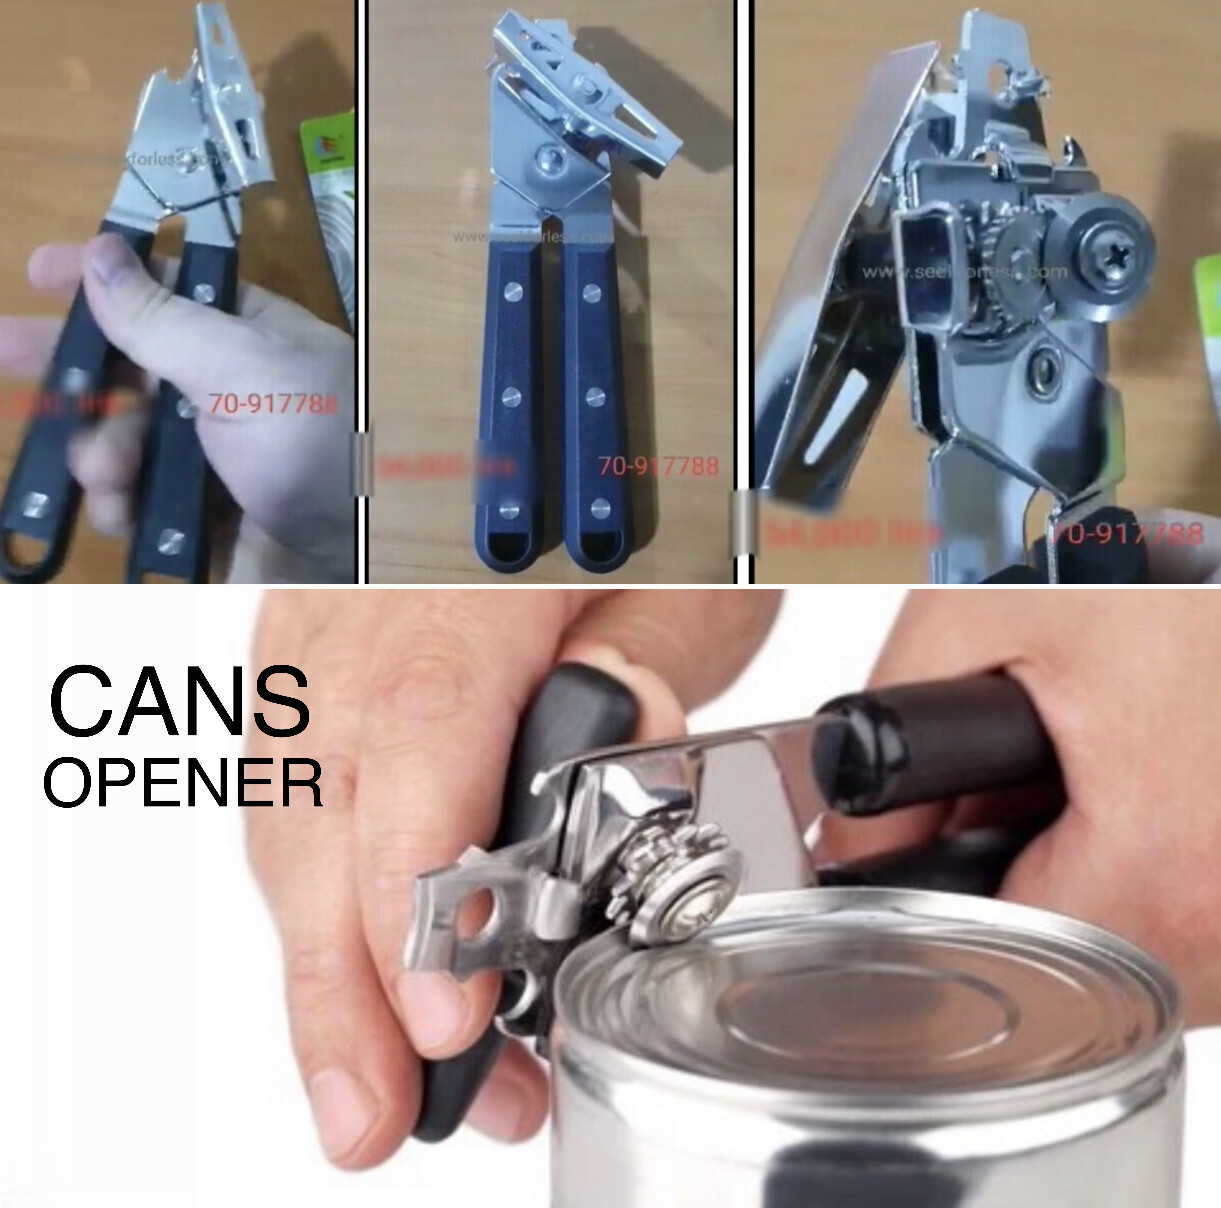 Cans Opener